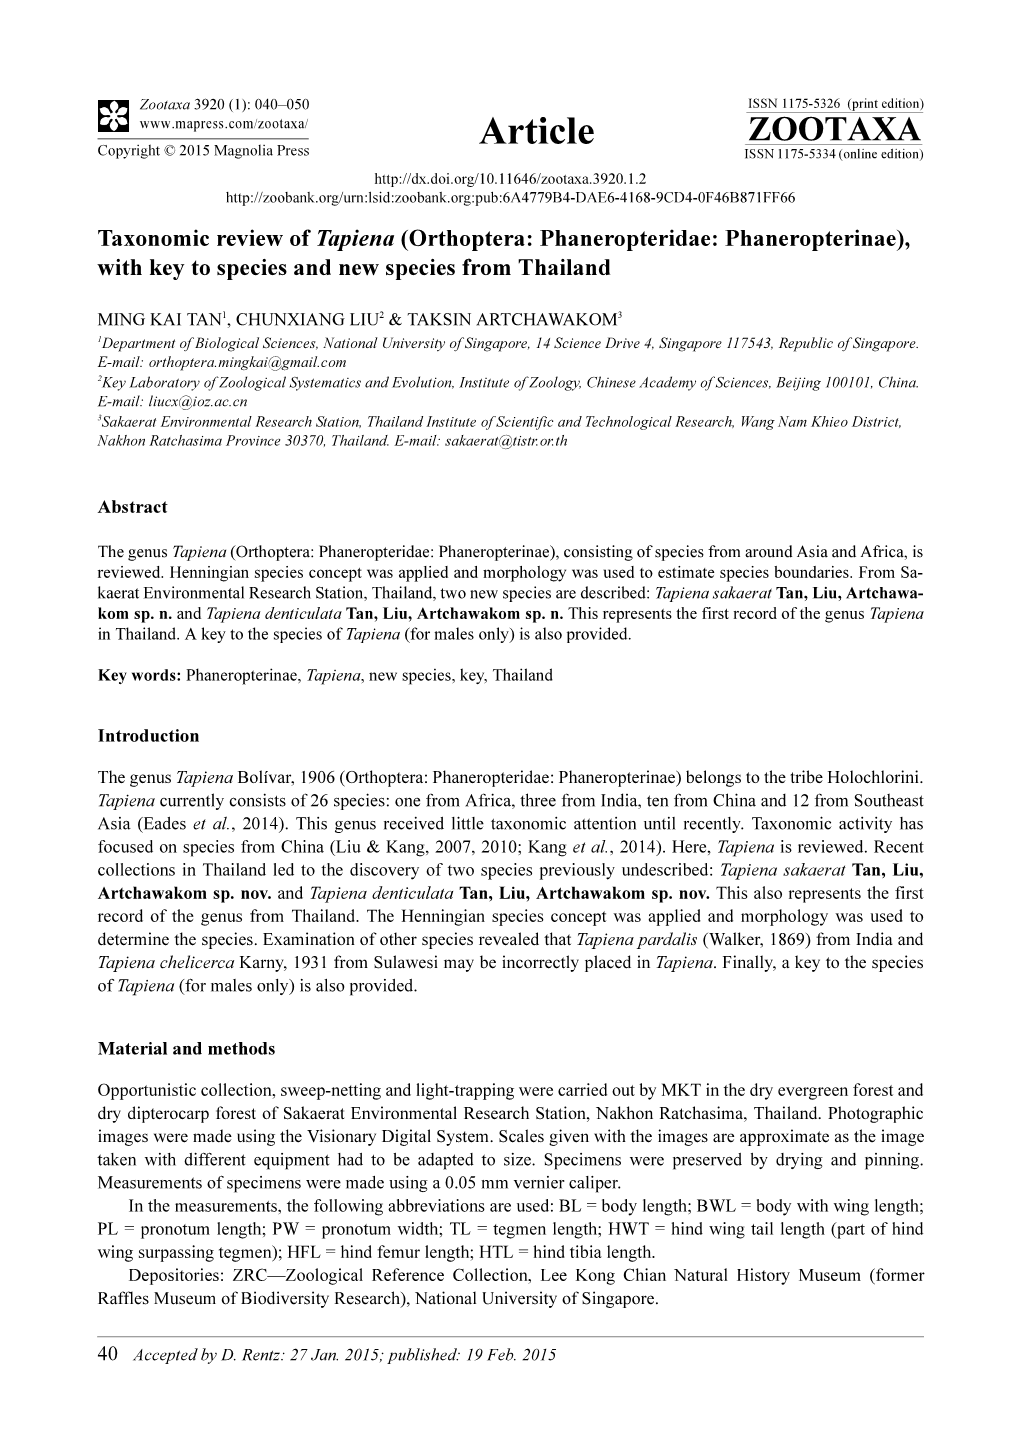 Taxonomic Review of Tapiena (Orthoptera: Phaneropteridae: Phaneropterinae), with Key to Species and New Species from Thailand